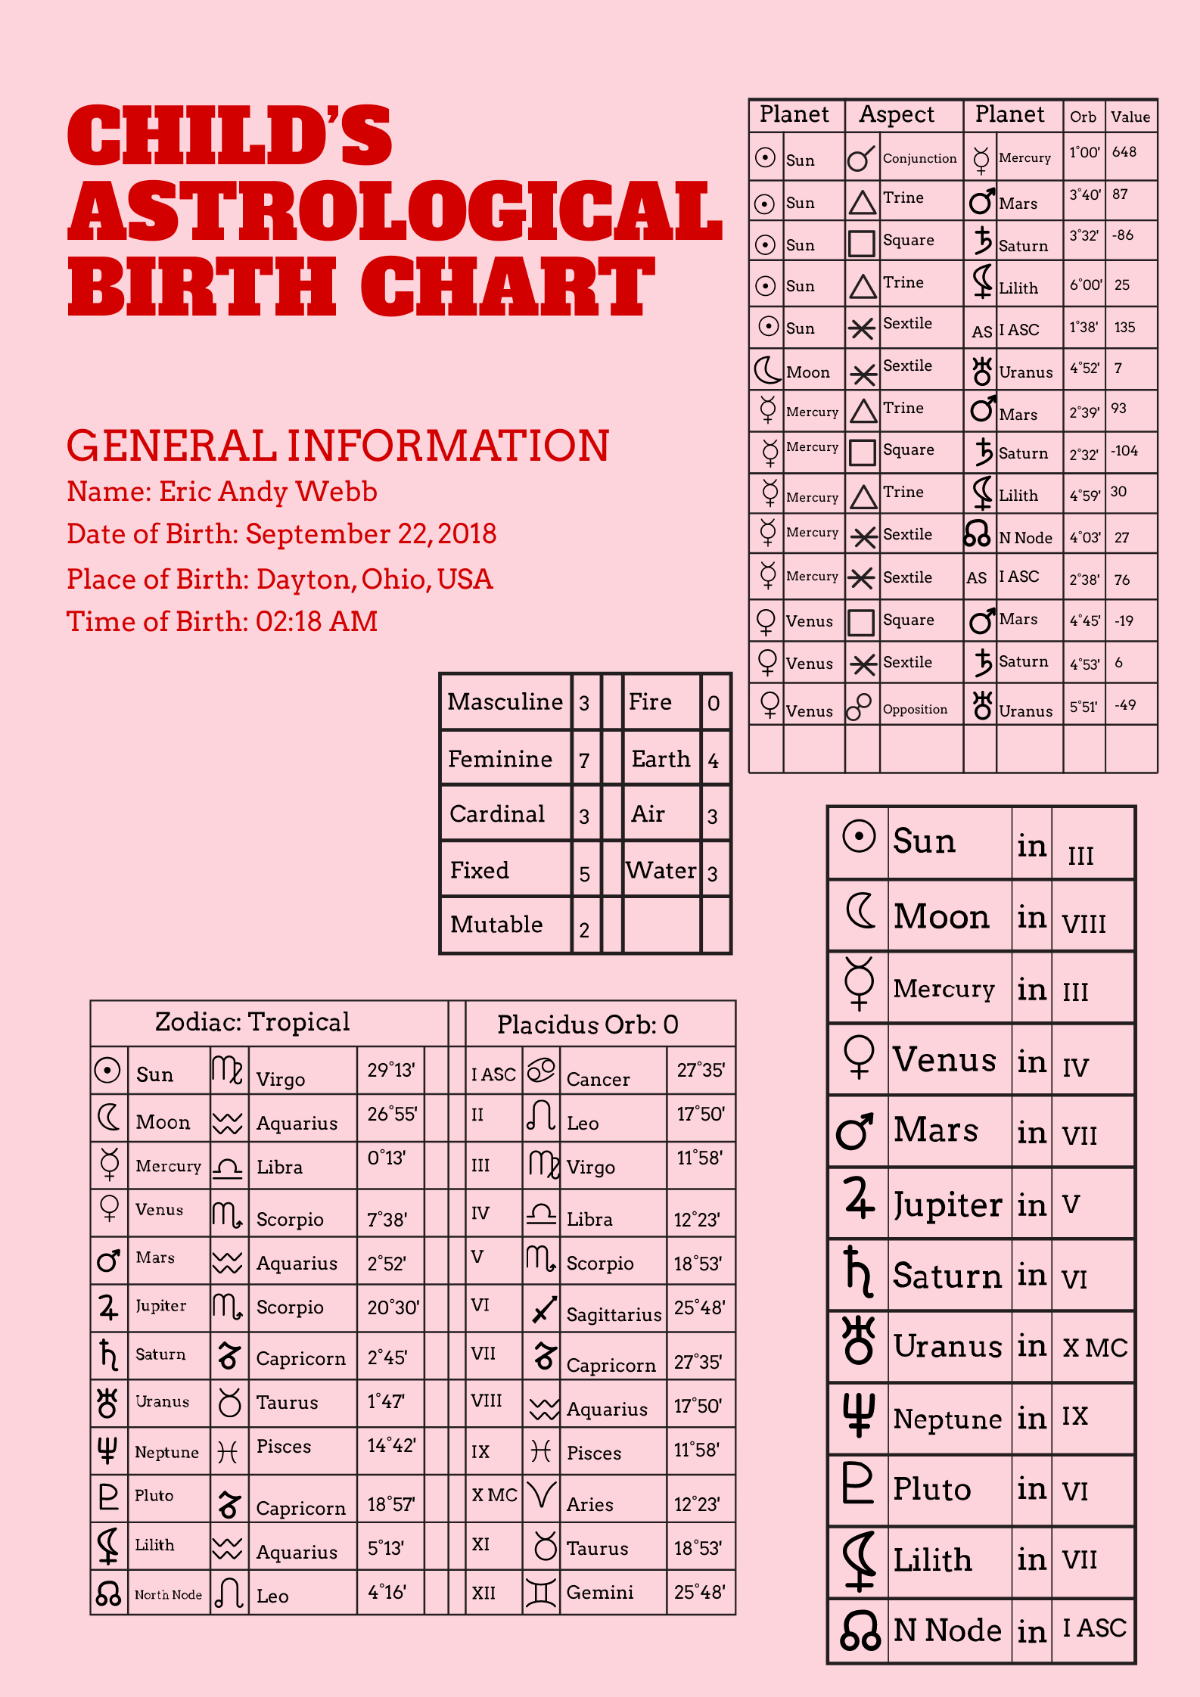 Child's Astrological Birth Chart